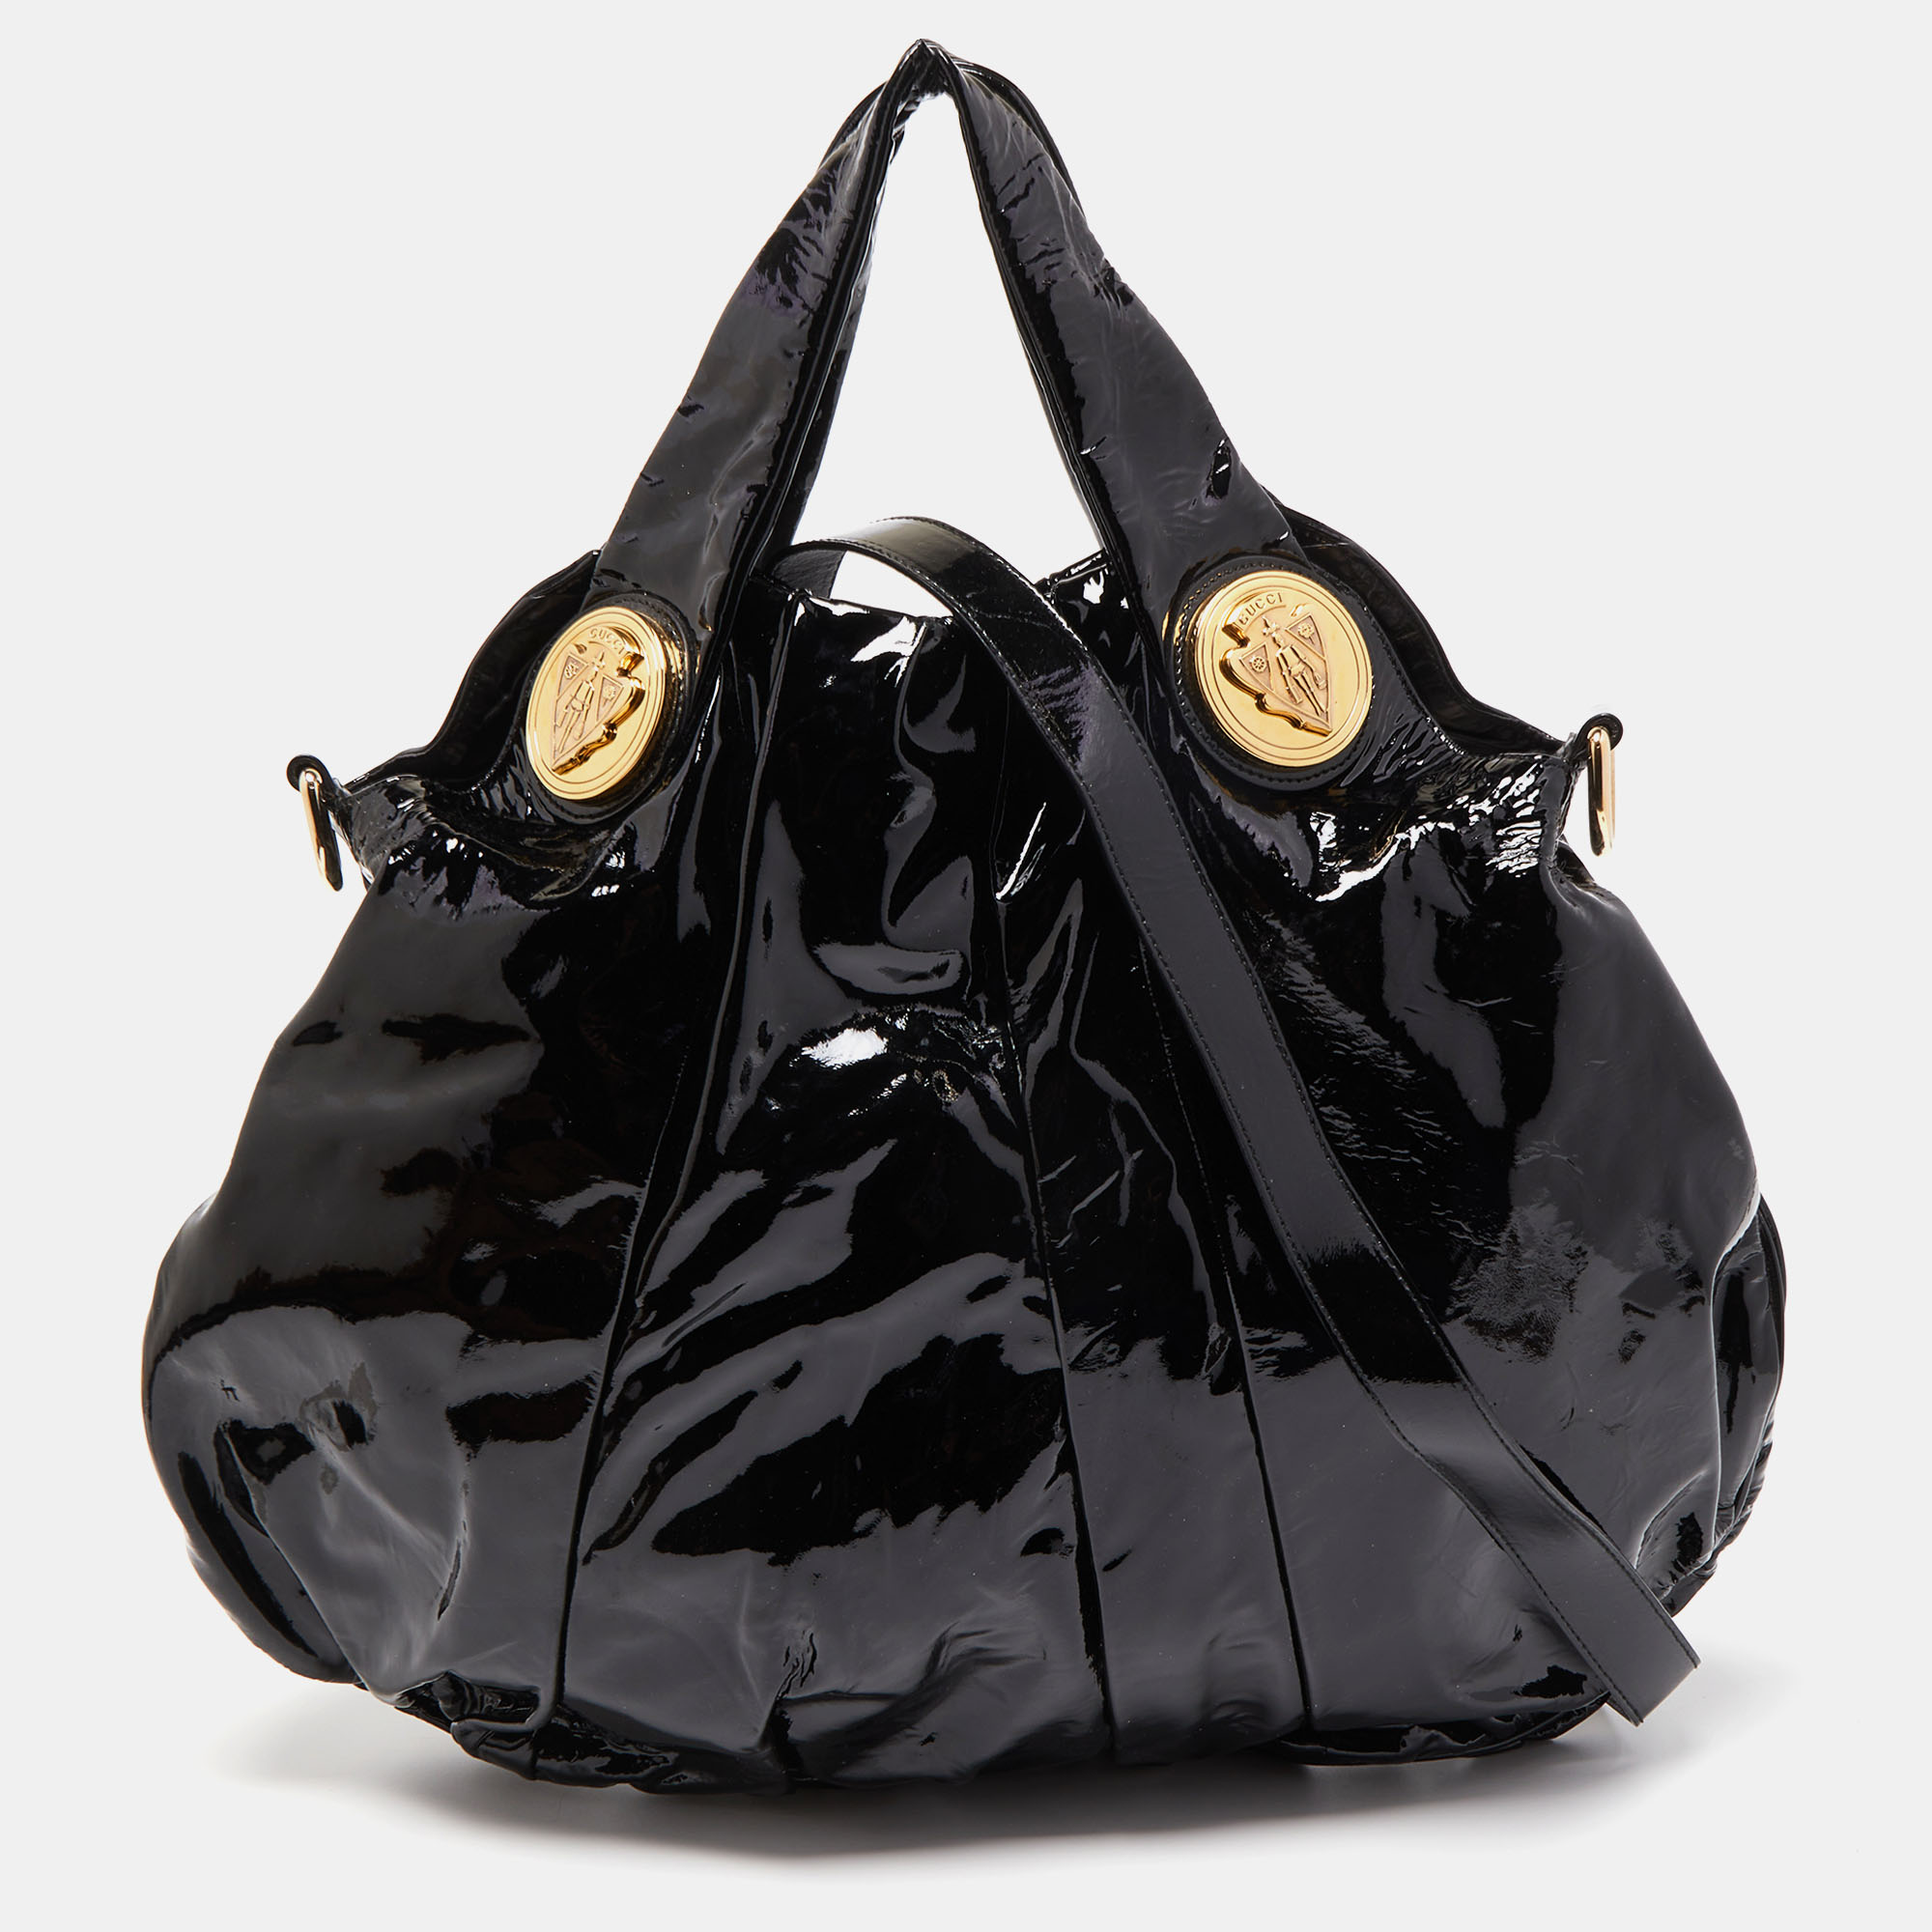 Pre-owned Gucci Black Patent Leather Large Hysteria Hobo